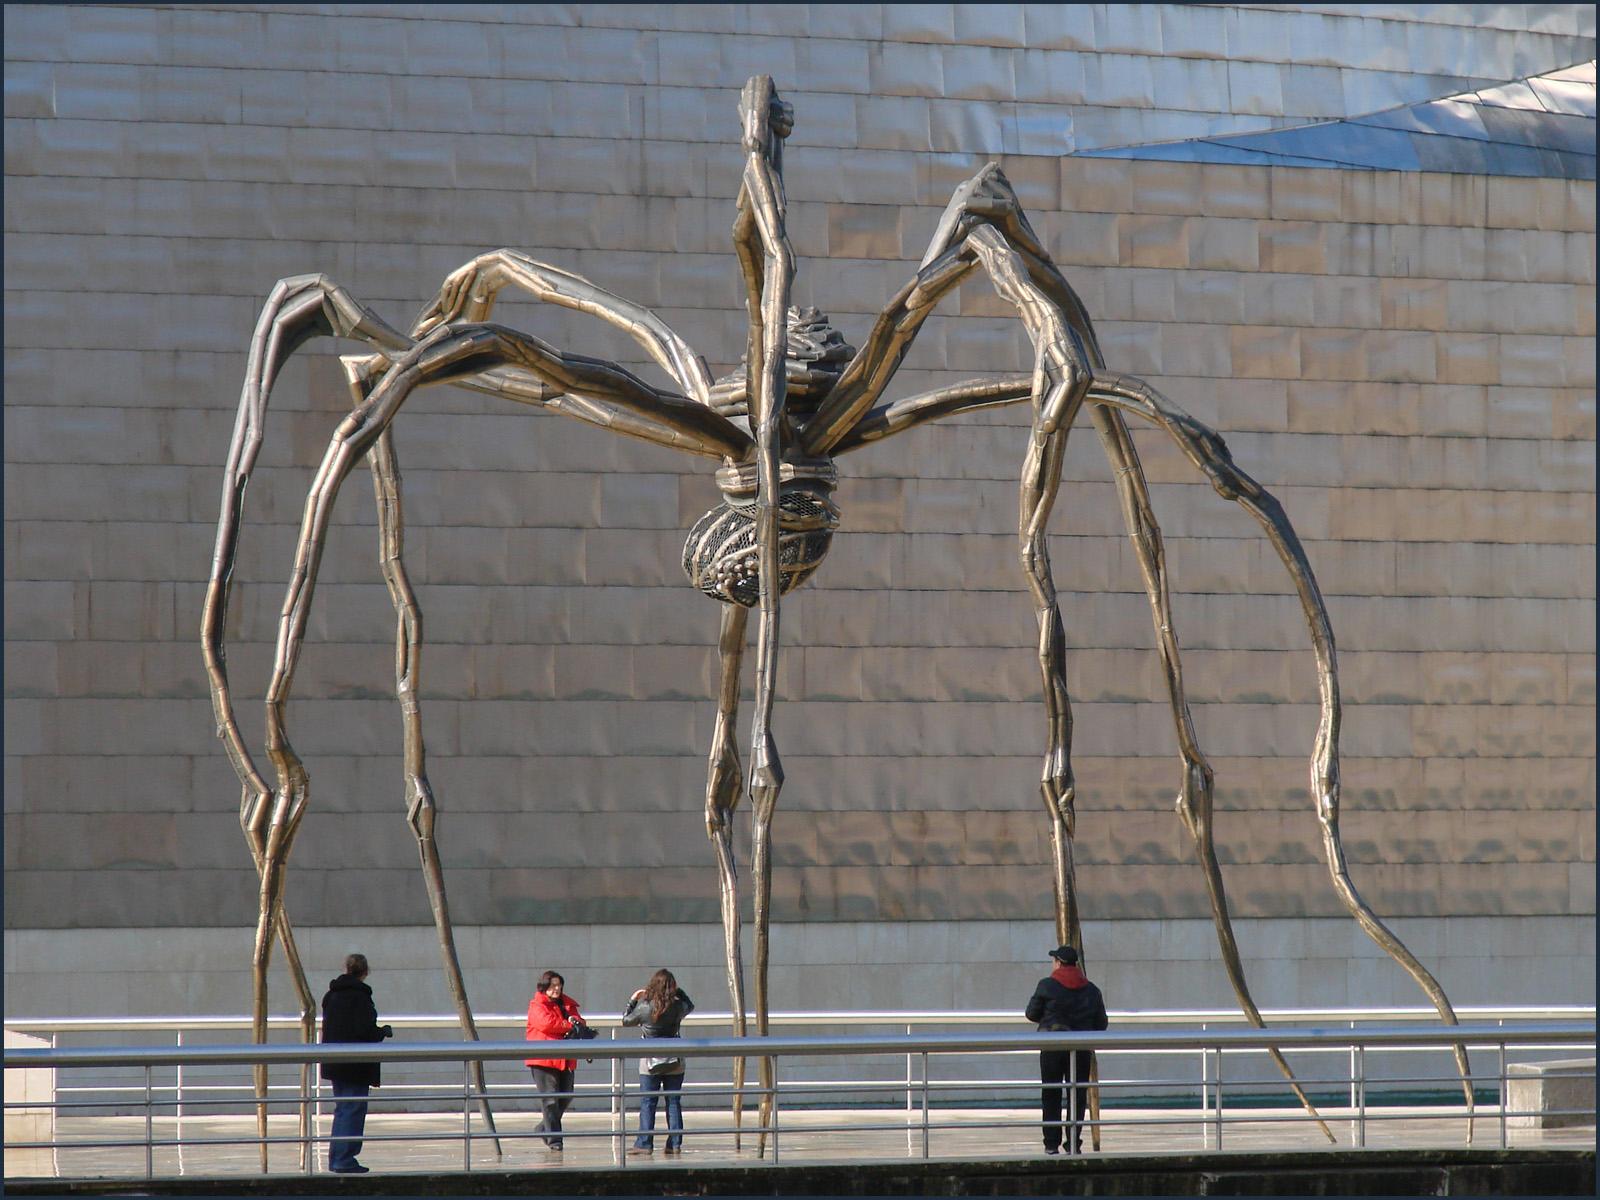 Palm Springs Art Museum - Spiders have been a recurring theme in the work  of Louise Bourgeois since the late 1940s. While many may see spiders as  menacing, Bourgeois thought of them